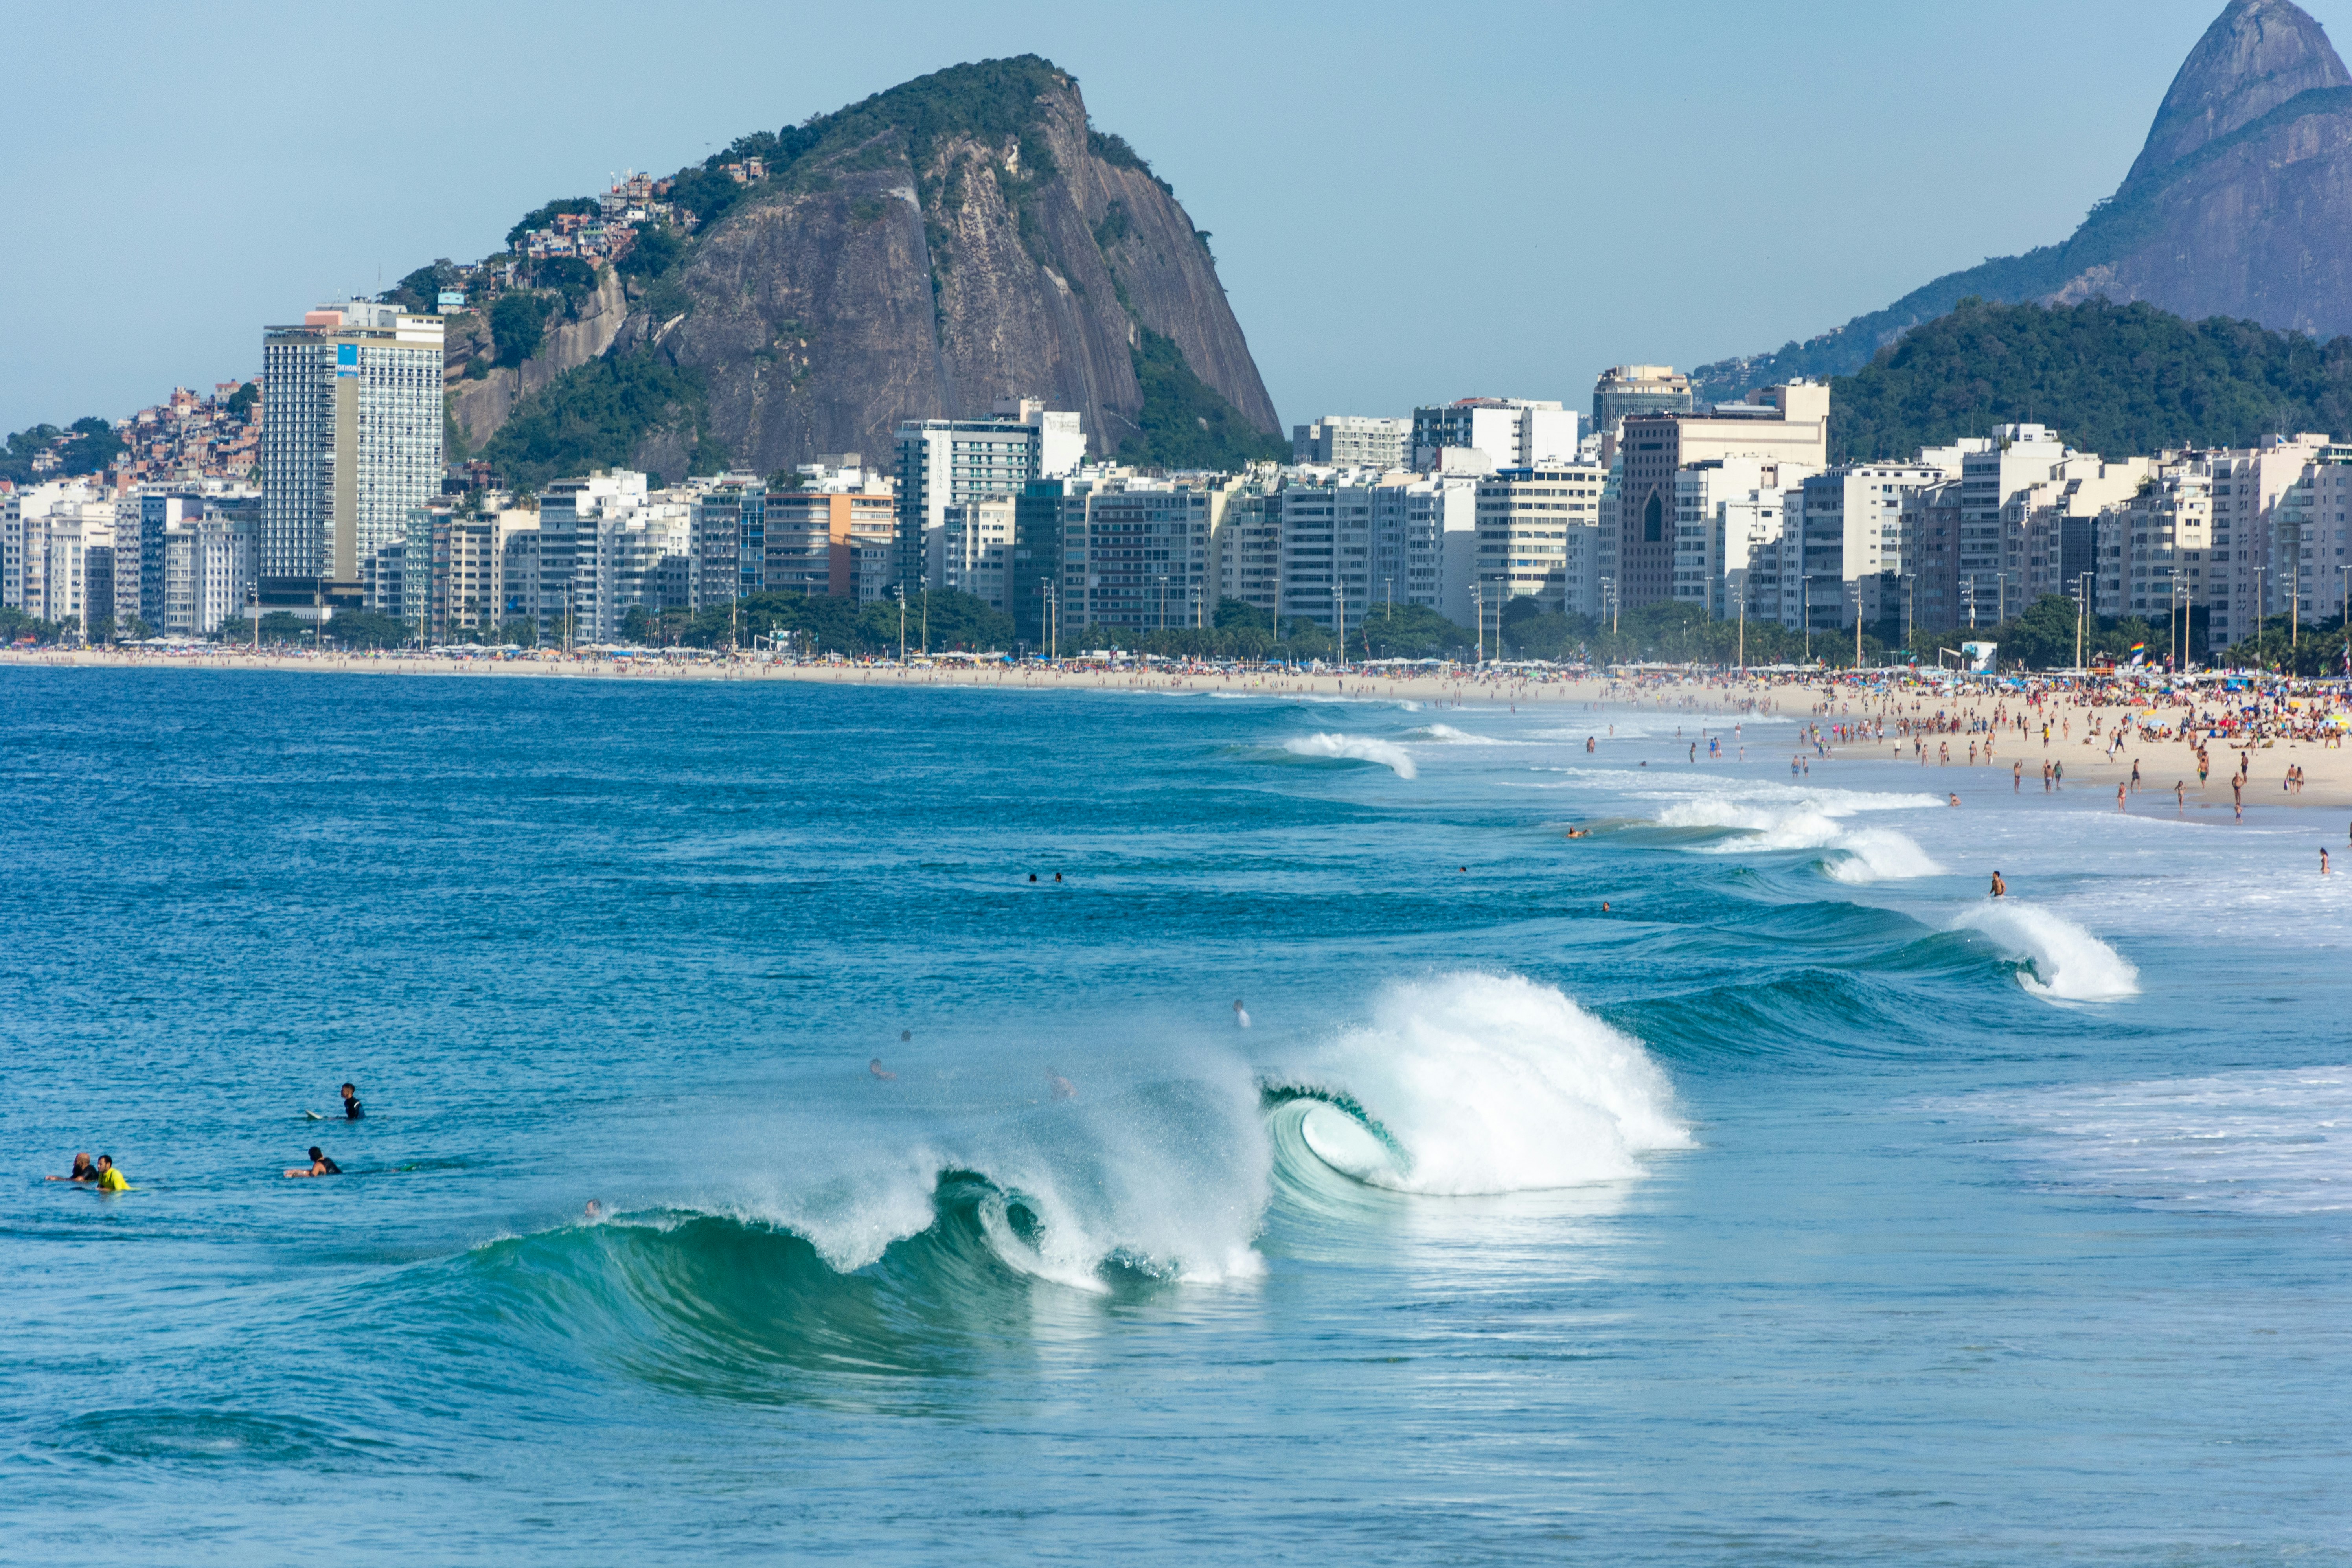 Waves crash to the shore on the busy Copacabana beach, in Rio de Janeiro, on a sunny day. People are swimming in the ocean.